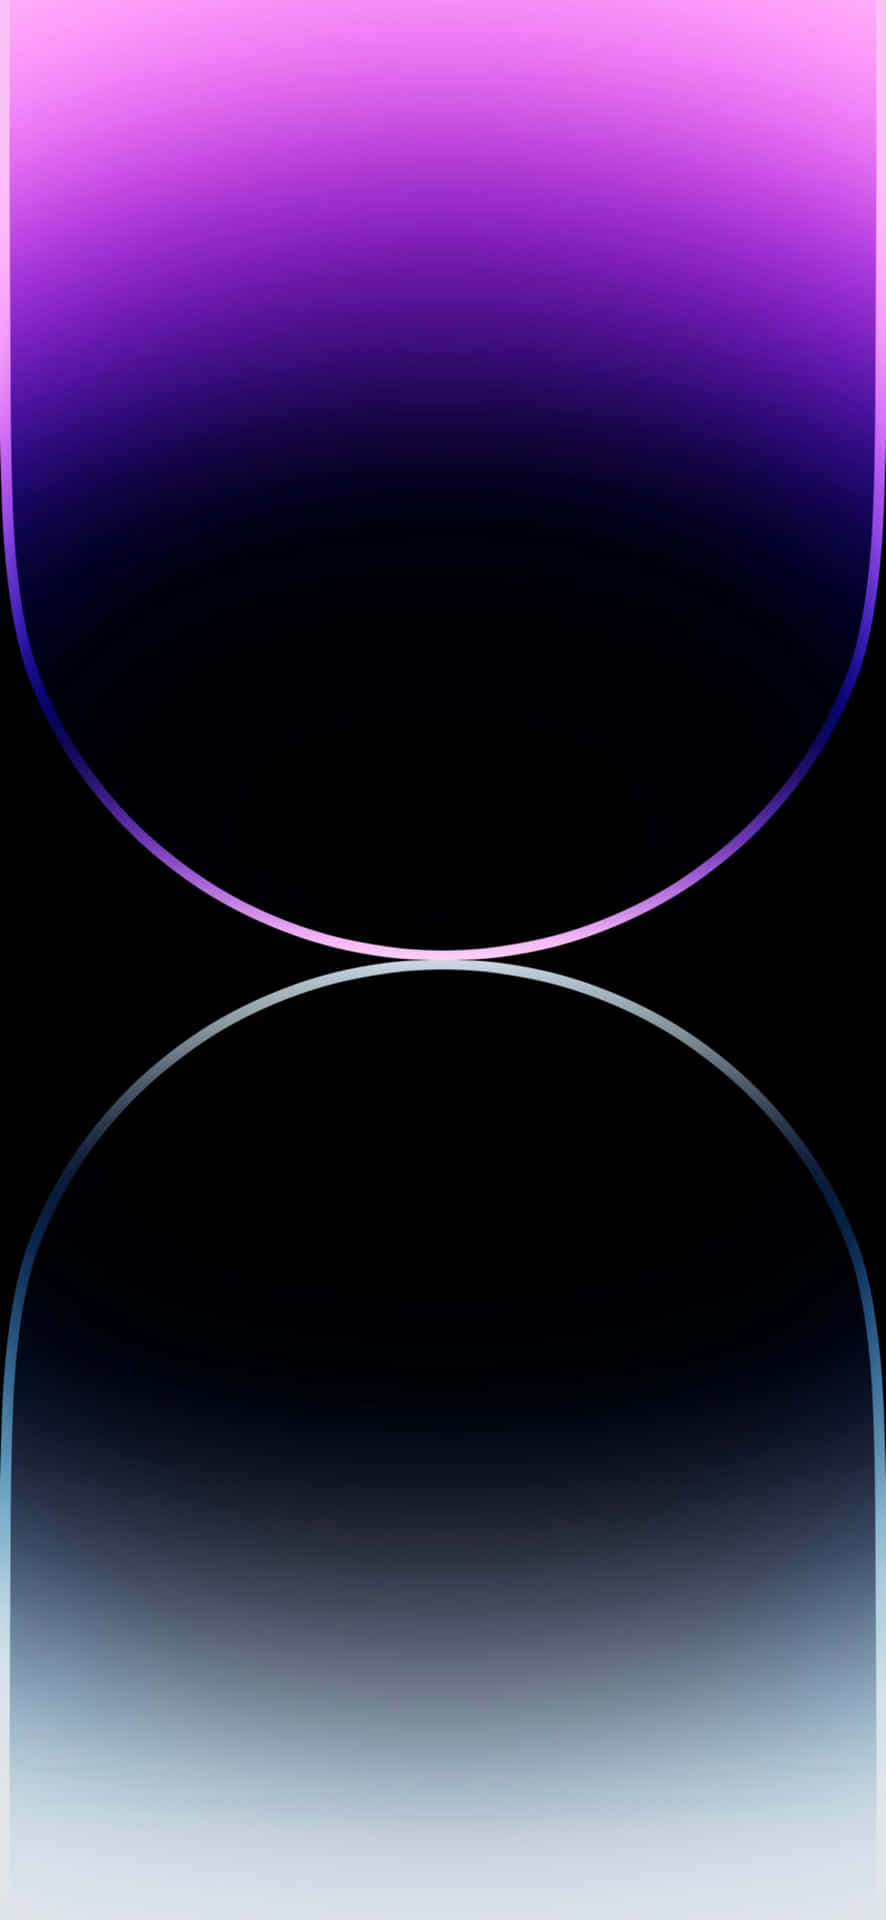 A Purple And Black Background With A Curved Shape Wallpaper